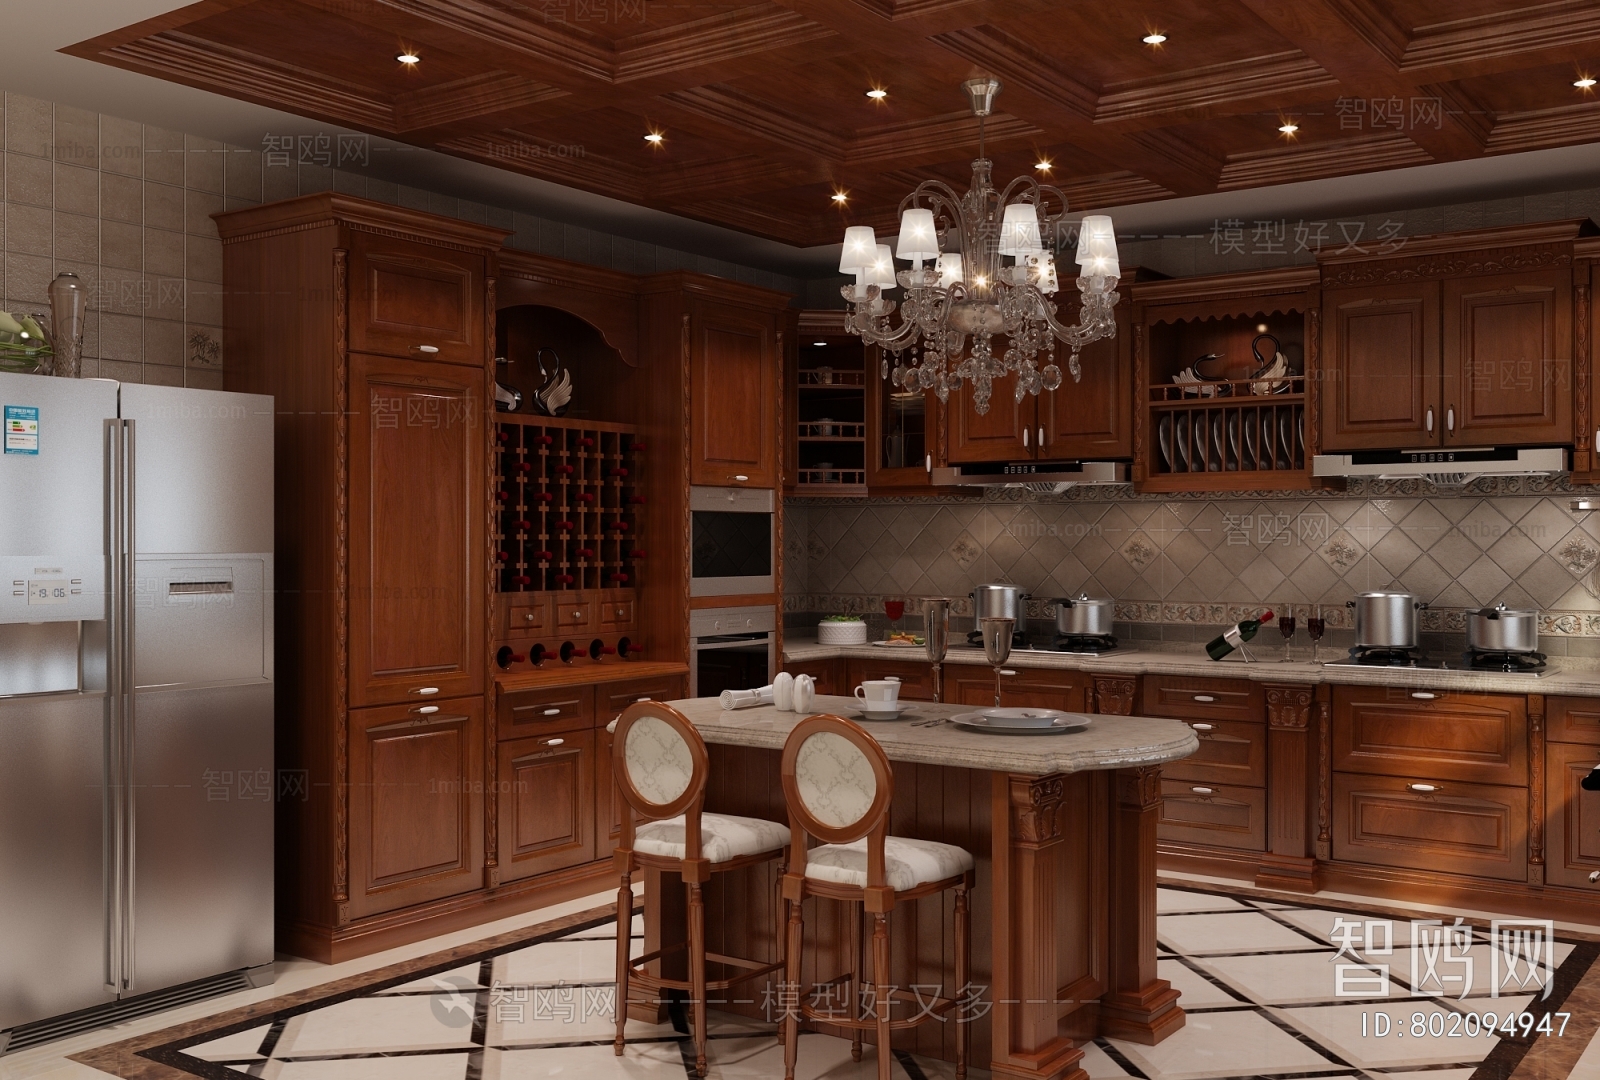 New Classical Style Open Kitchen